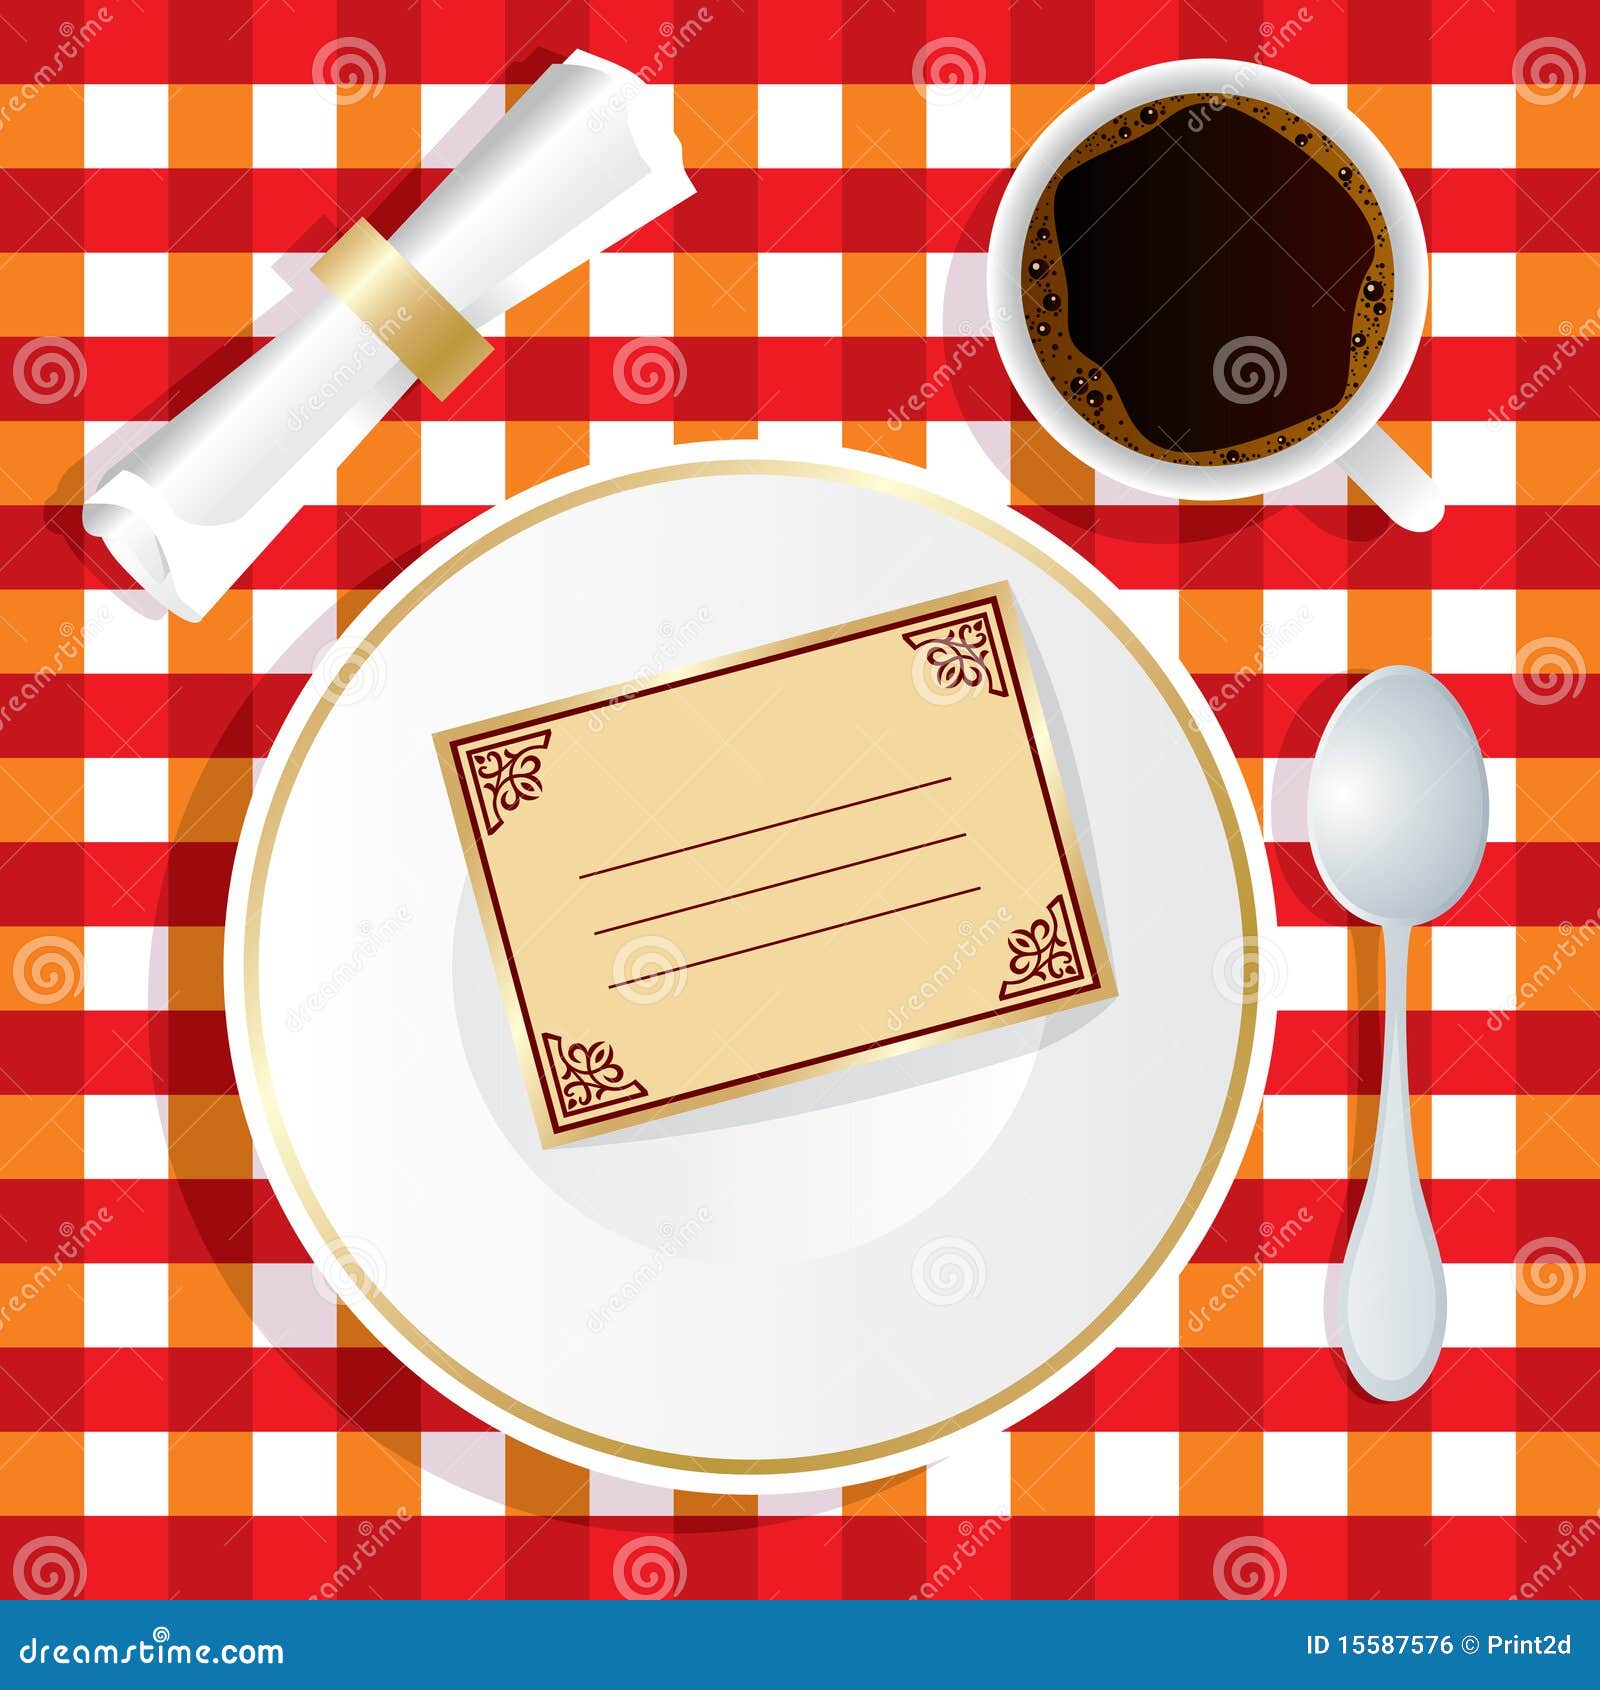 Invitation to lunch stock vector Image of border cafe 